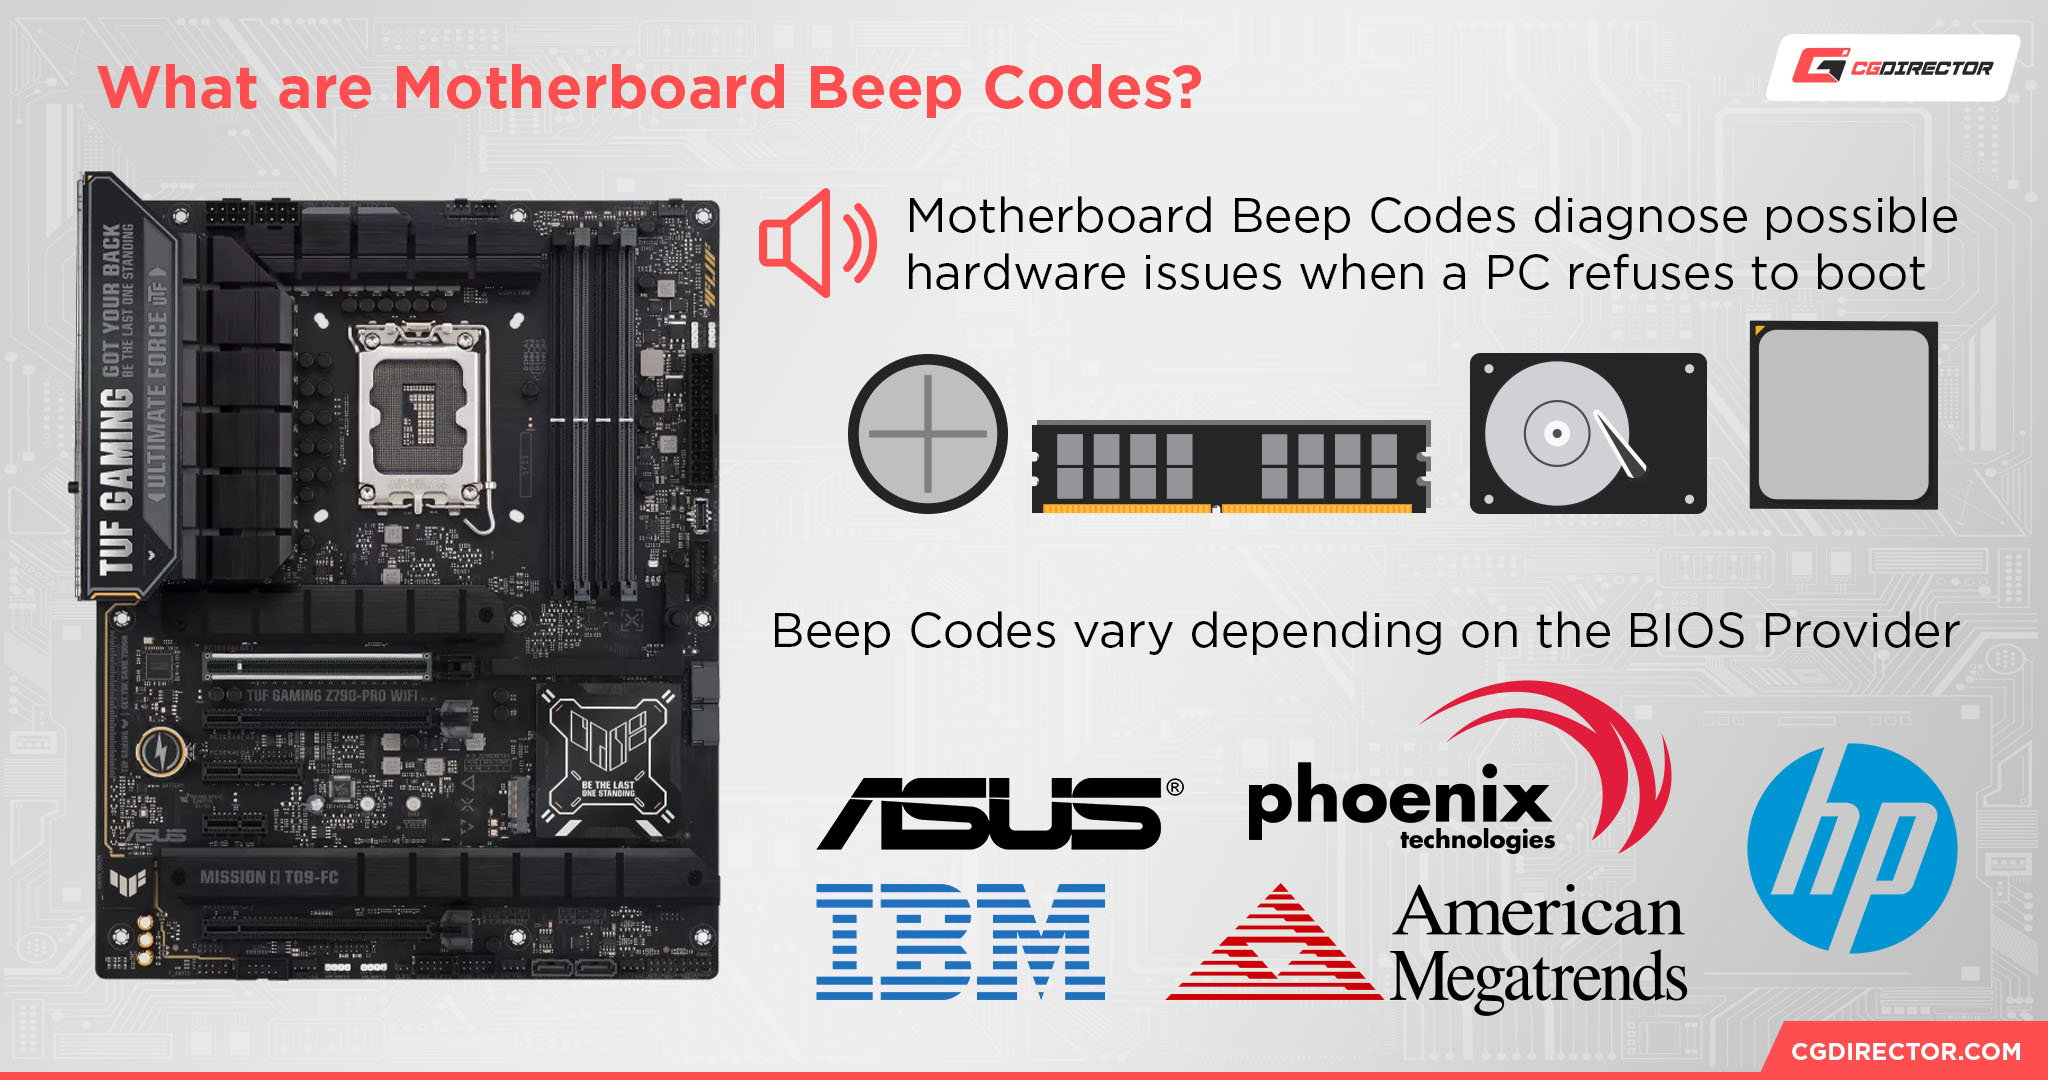 What are Motherboard Beep Codes